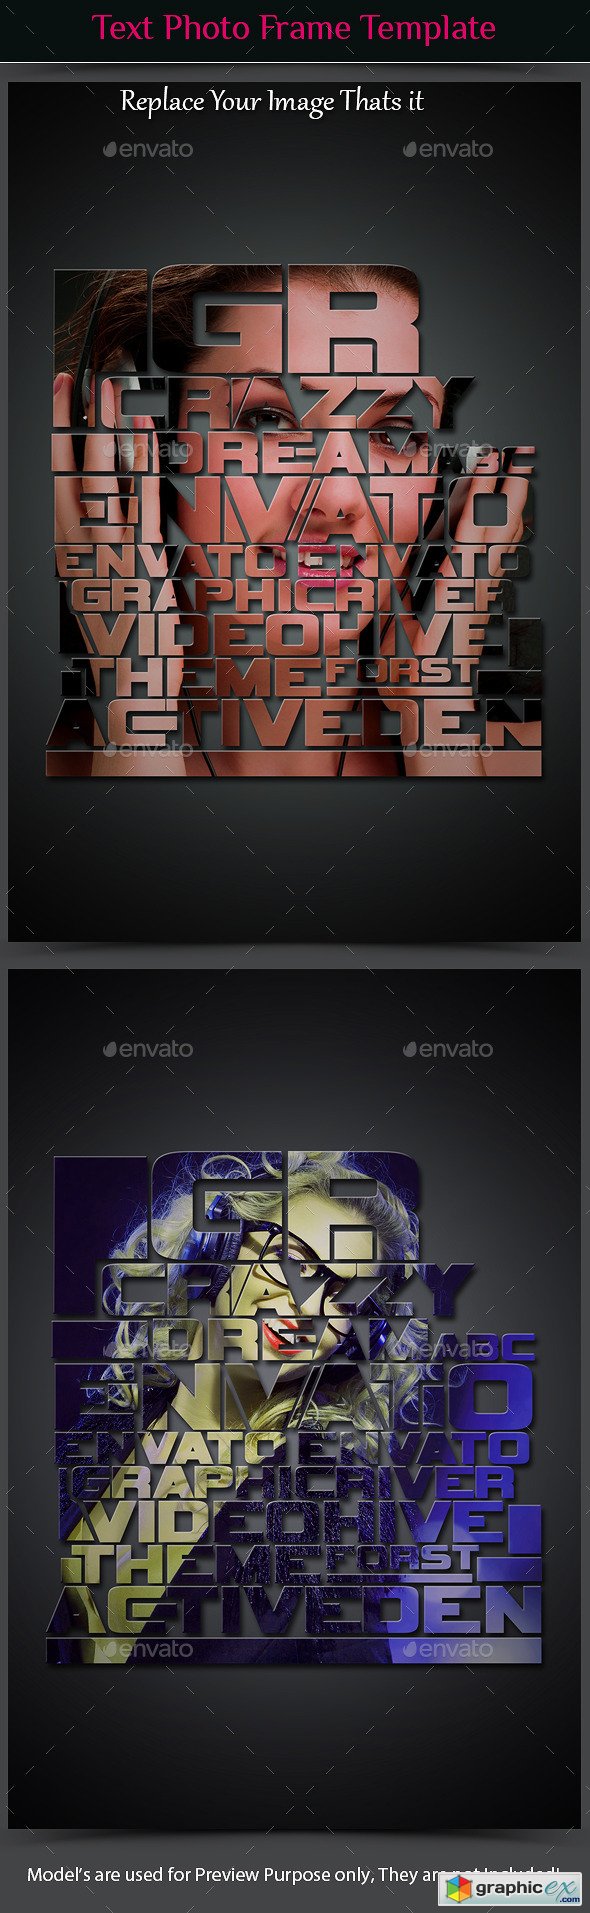 Text Photo Frame Template